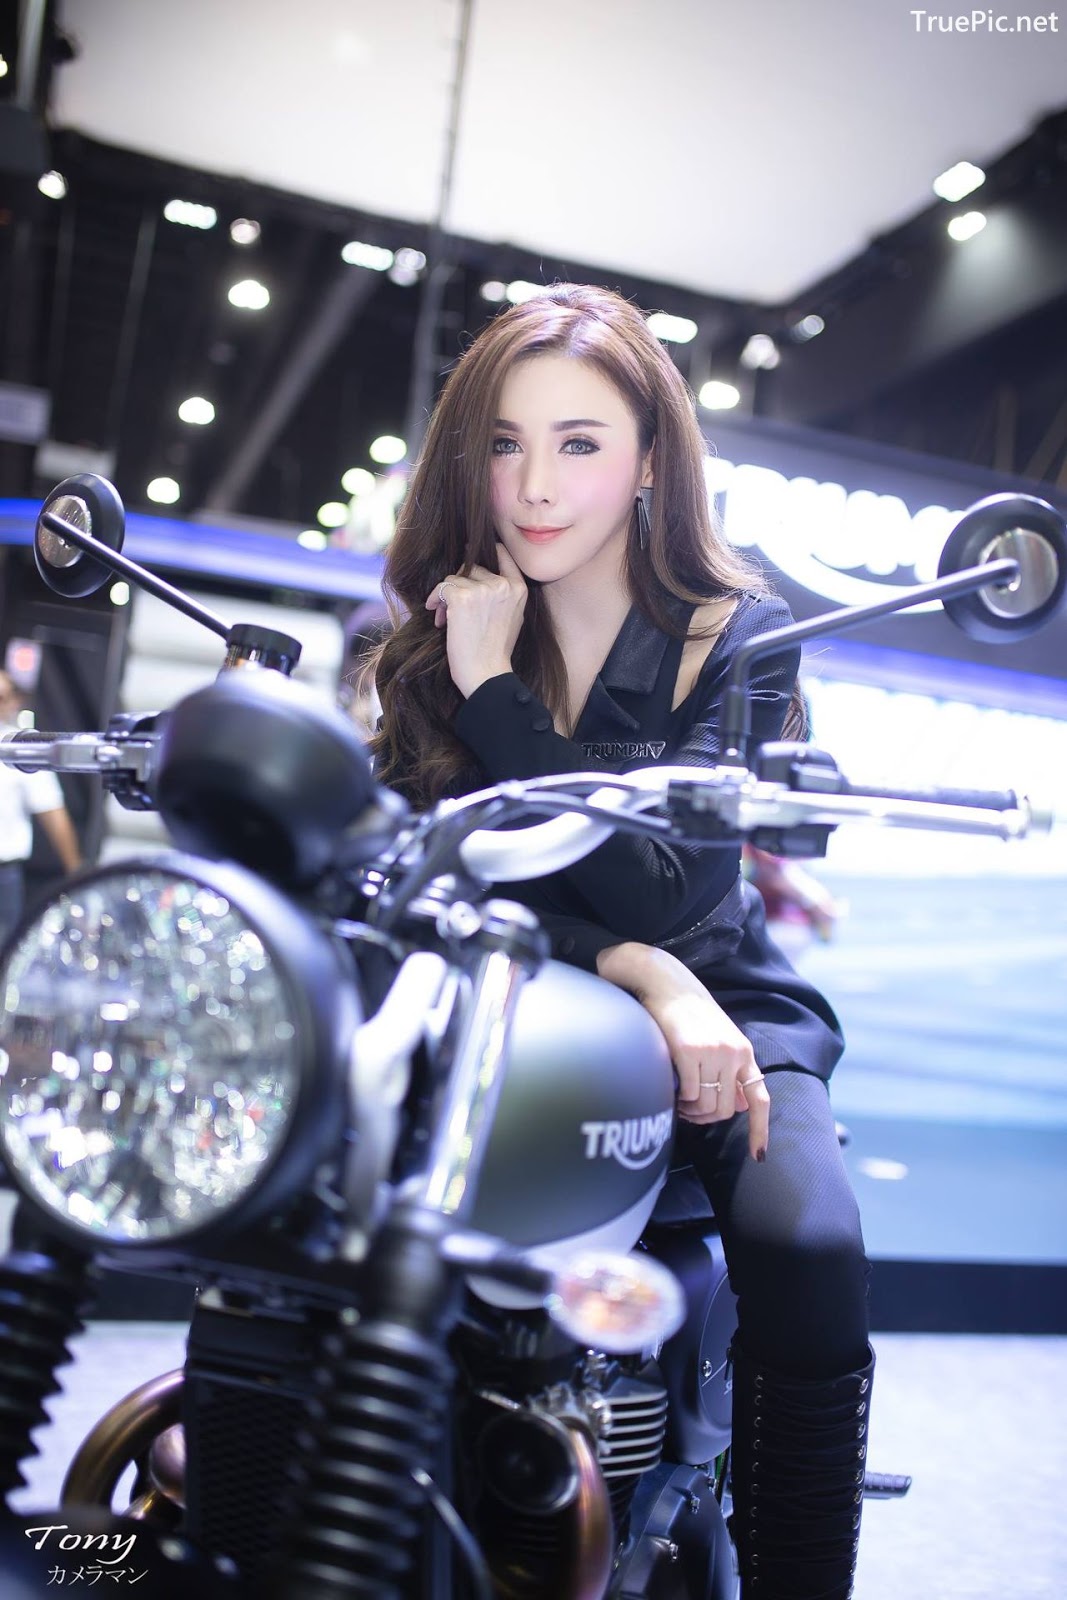 Image-Thailand-Hot-Model-Thai-Racing-Girl-At-Motor-Expo-2018-TruePic.net- Picture-121